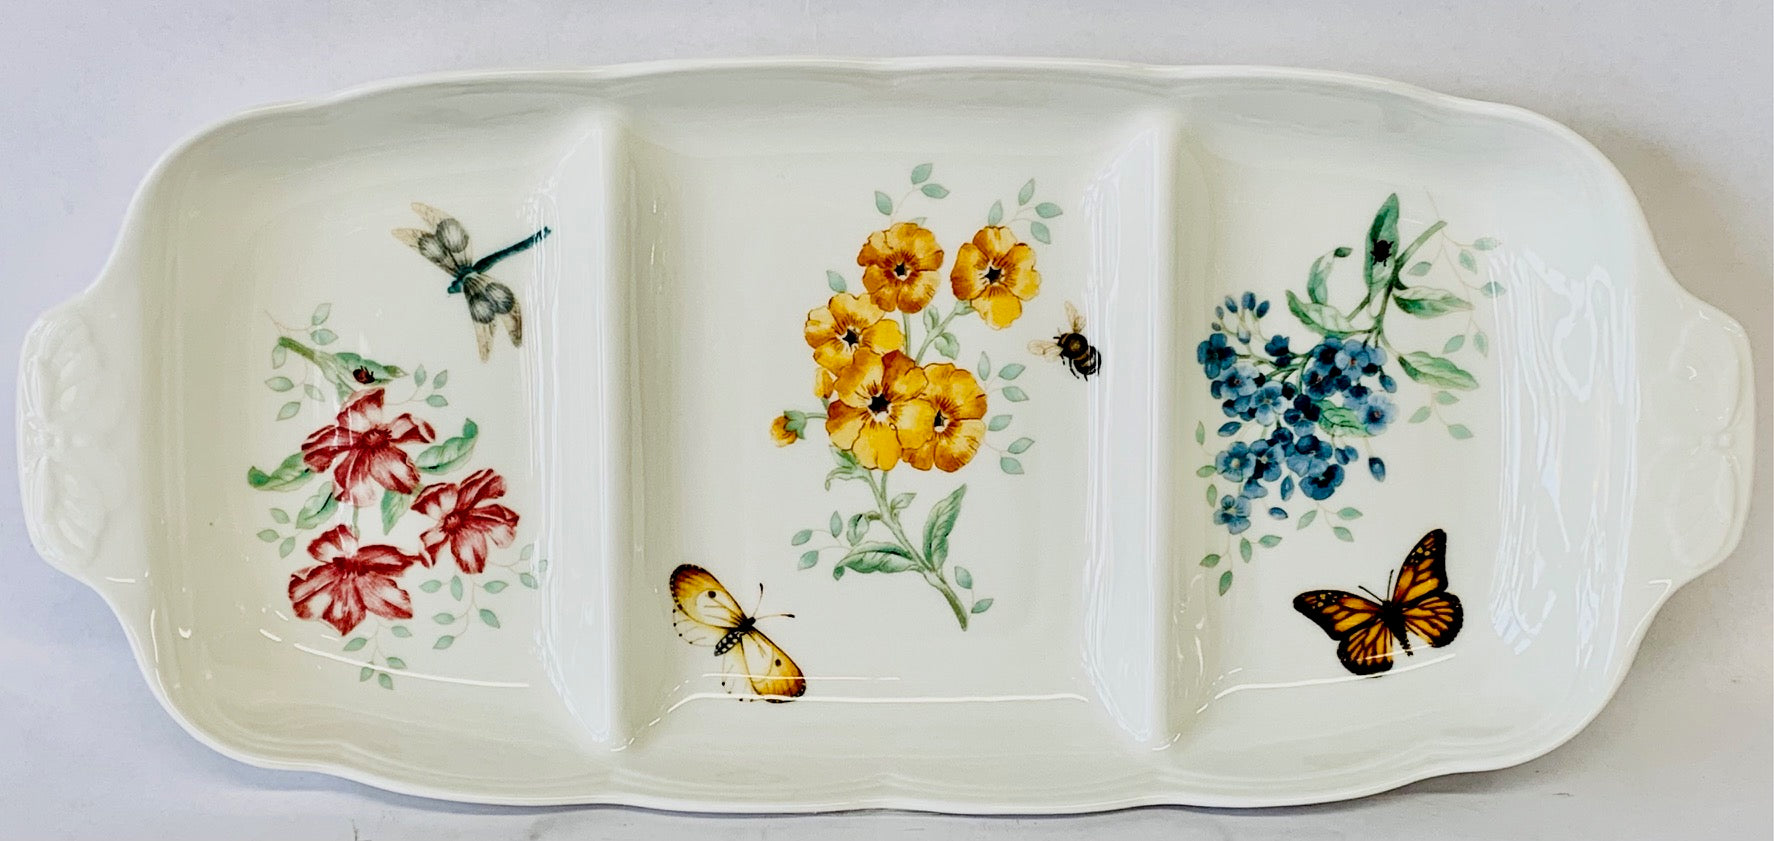 Lenox Butterfly Meadow platter 3 Divided Server 17" X 7.5" X 1.6" - Royal Gift